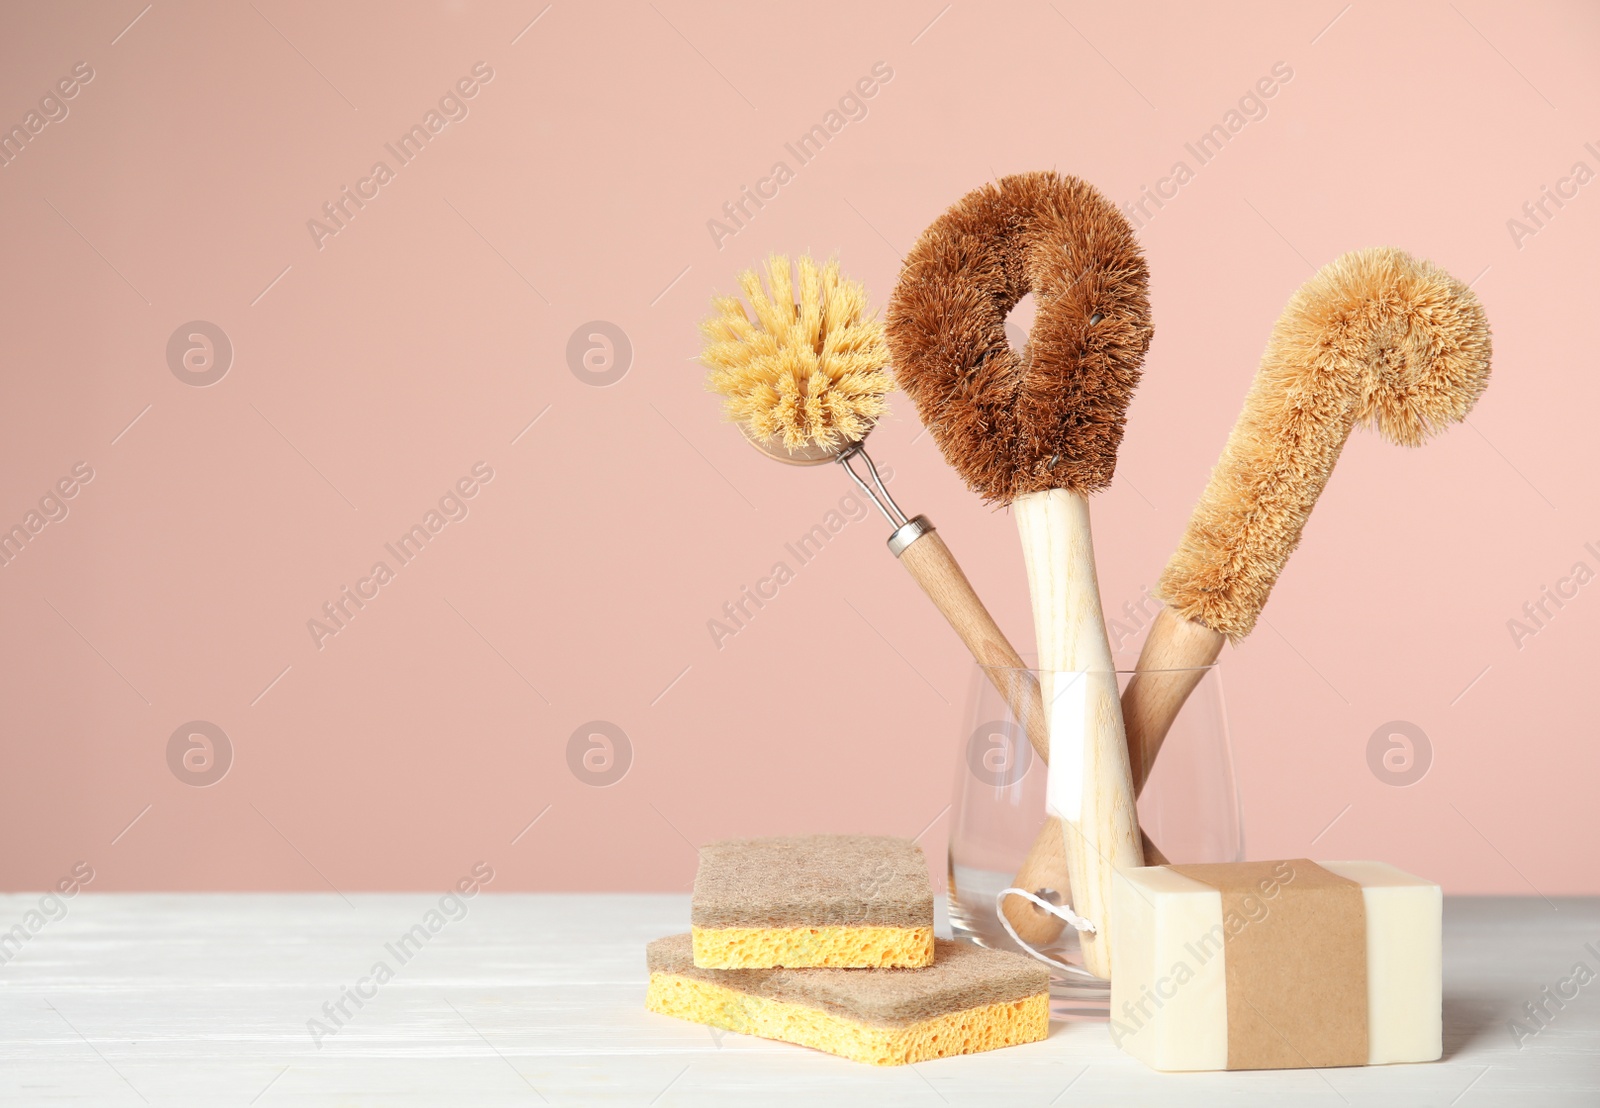 Photo of Cleaning brushes, soap bar and sponges on white wooden table against pink background, space for text. Dish washing supplies